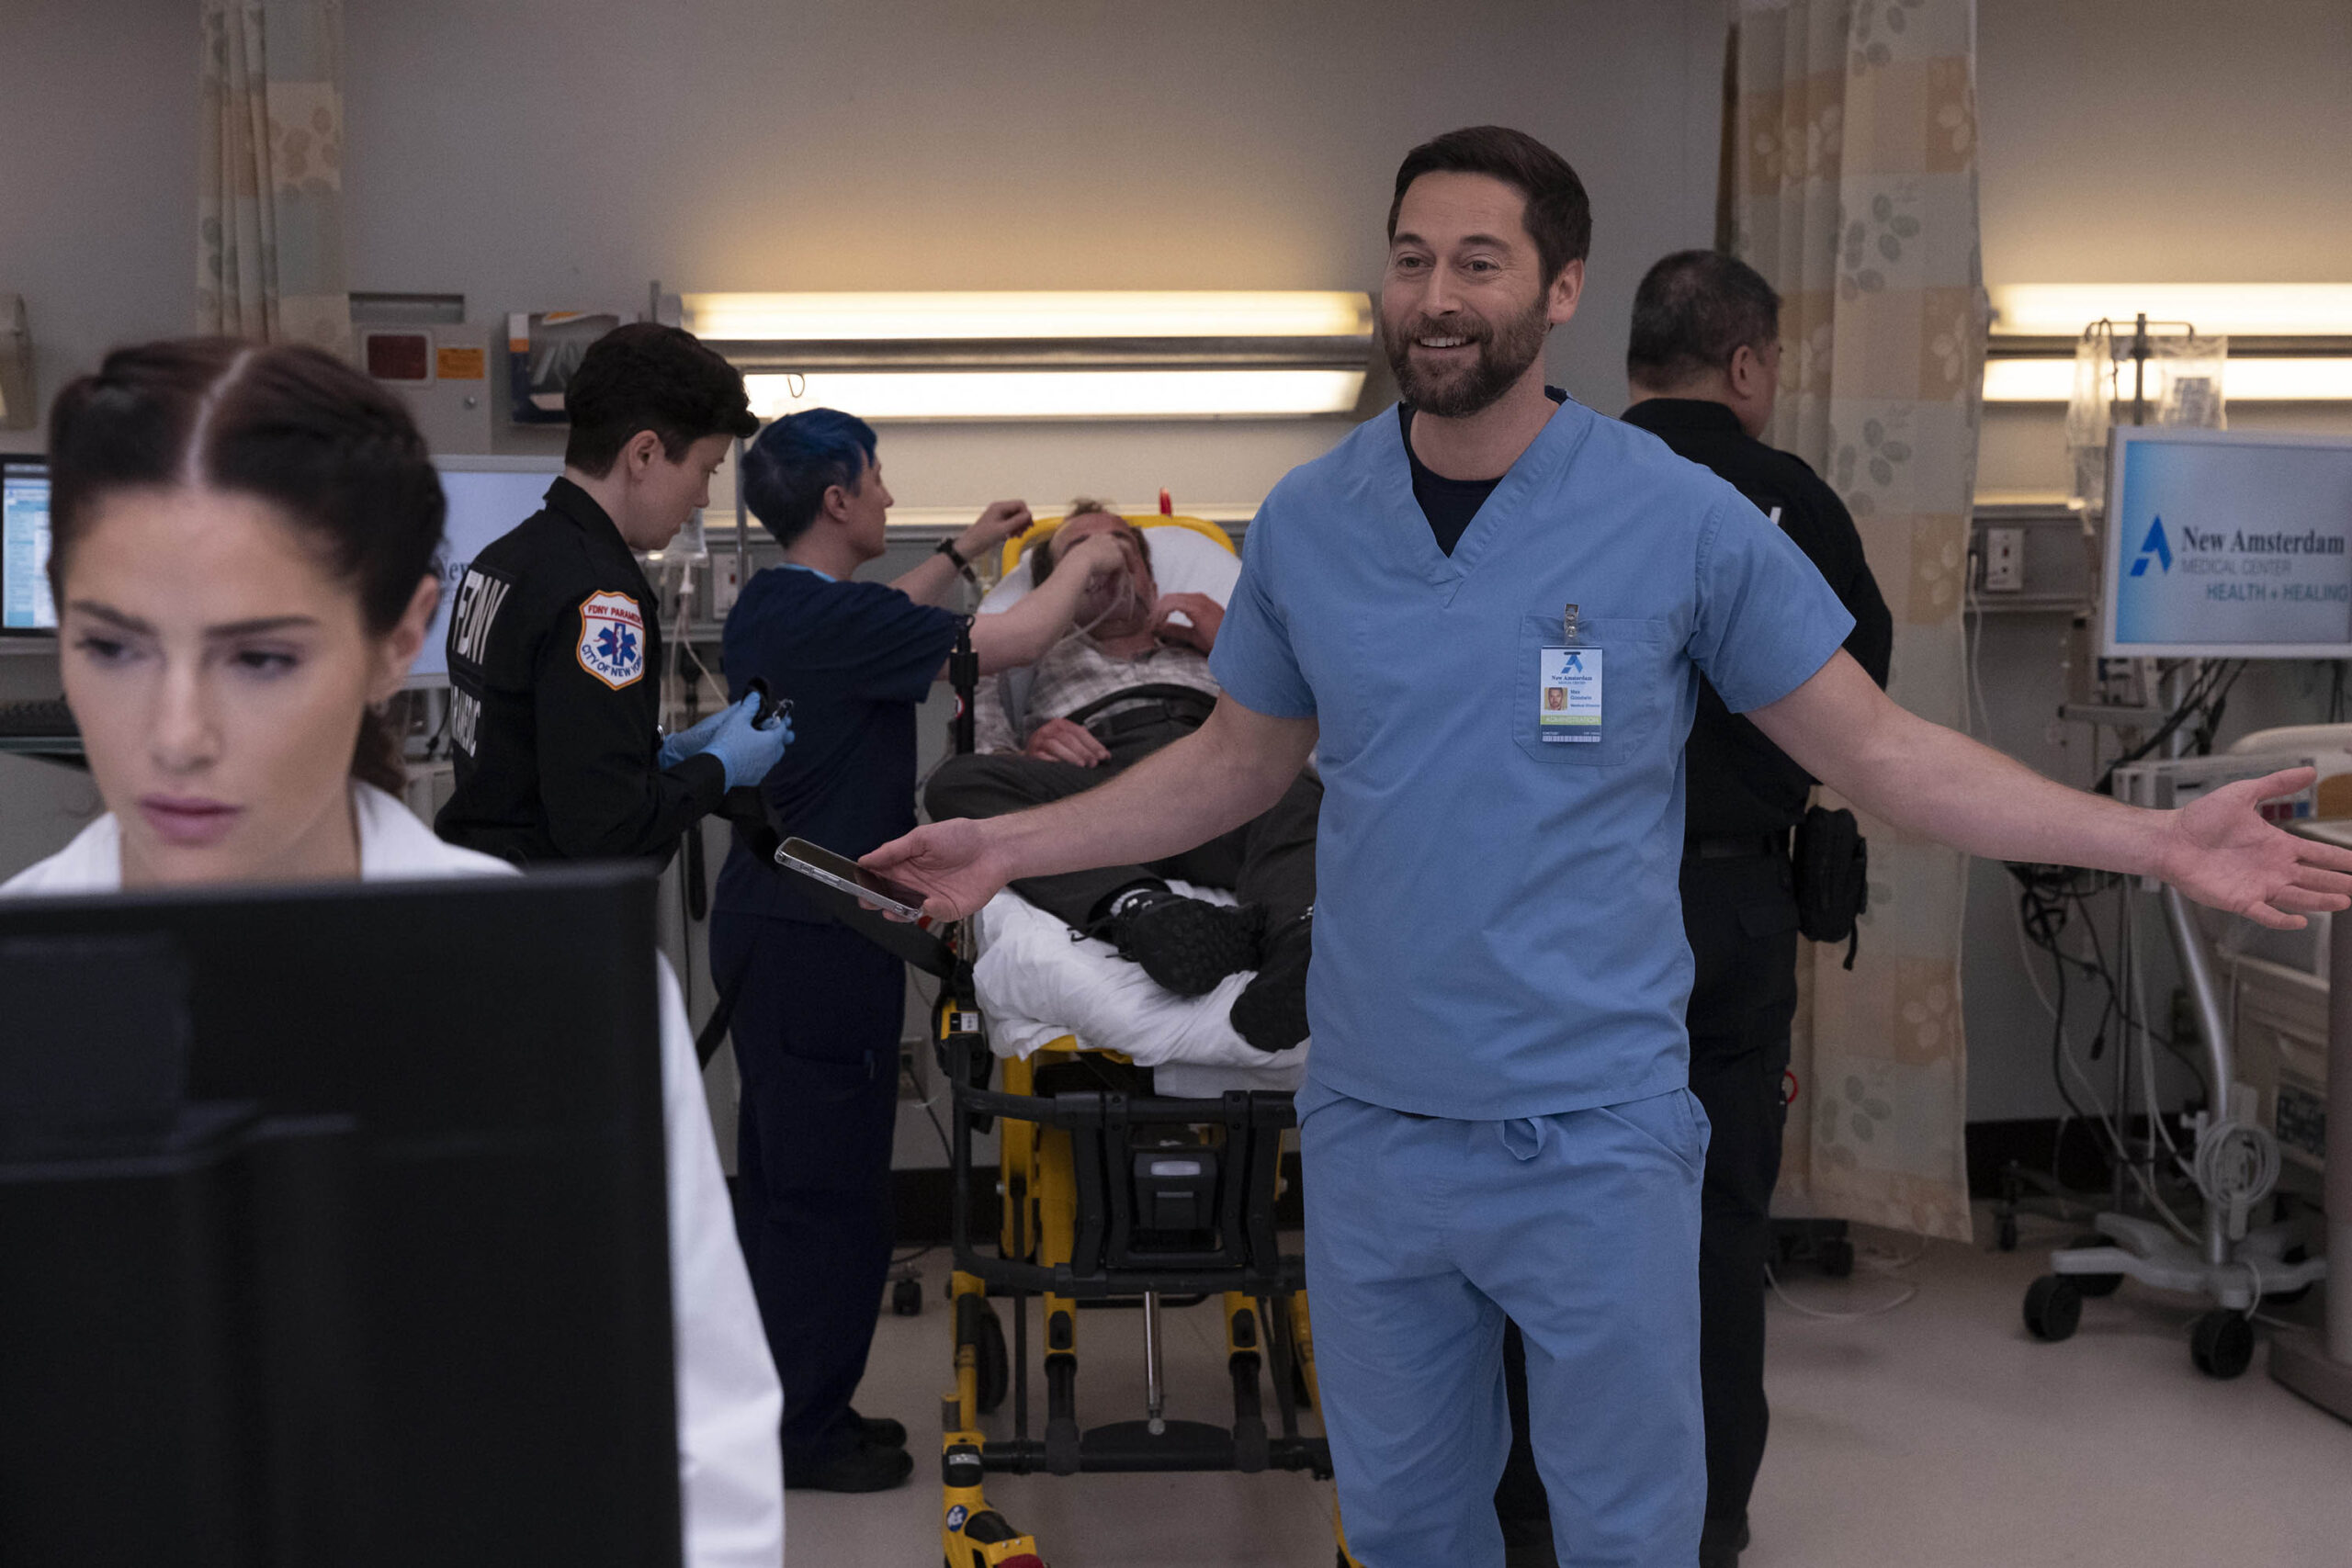 (S-D) Janet Montgomery come Dr. Lauren Bloom, Ryan Eggold come Dr. Max Goodwin in New Amsterdam 5x11 [credit: foto di Francisco Roman/NBC; Copyright 2022 NBCUniversal Media, LLC; courtesy of Mediaset]